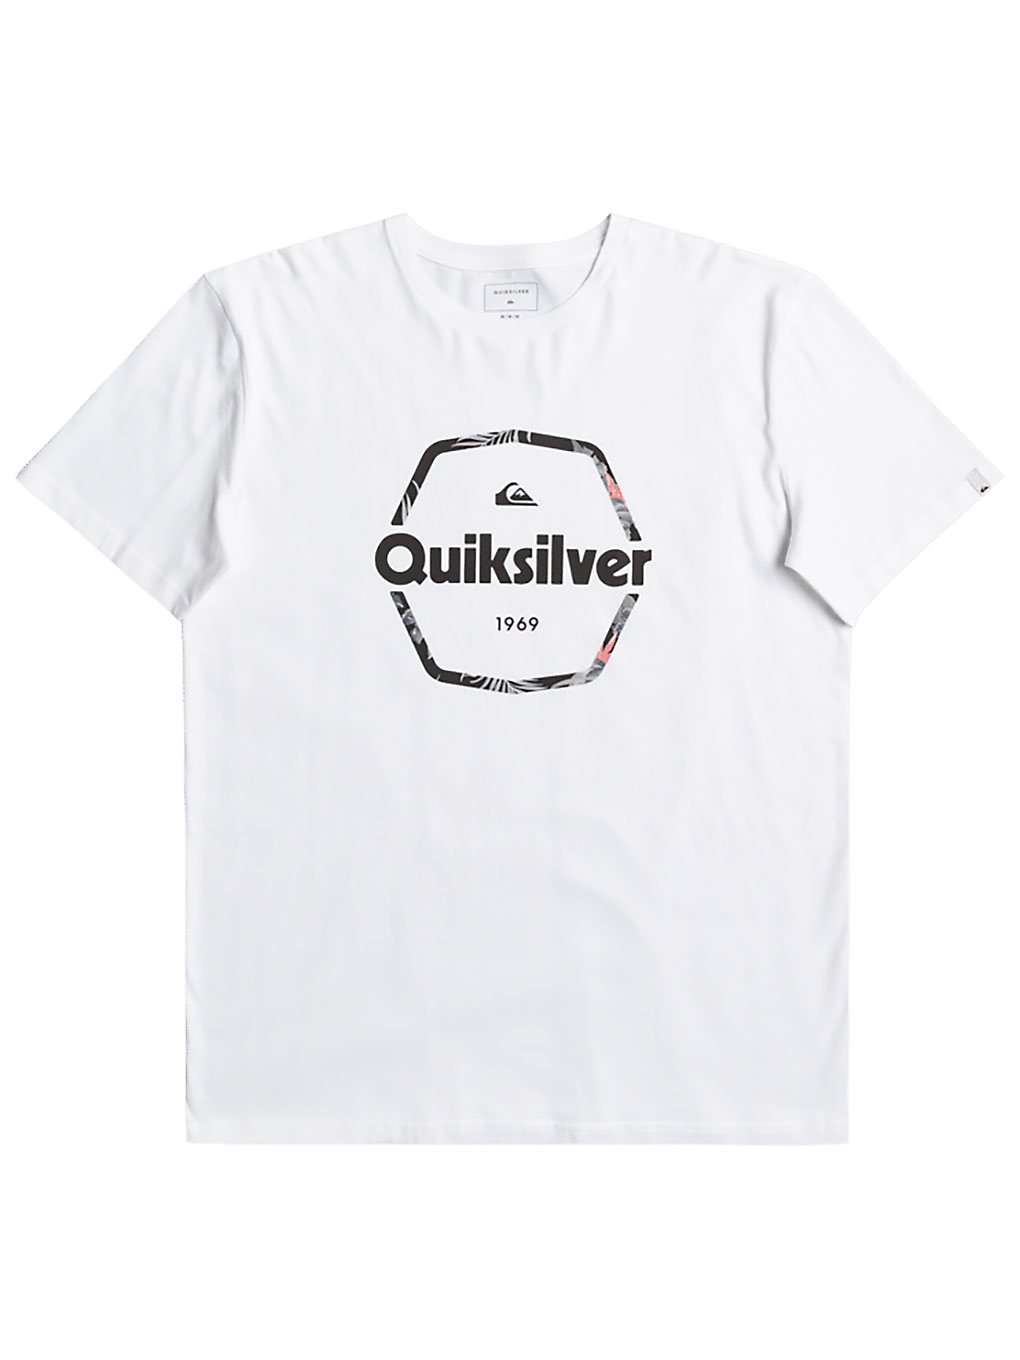 Quiksilver Hard Wired T-Shirt white